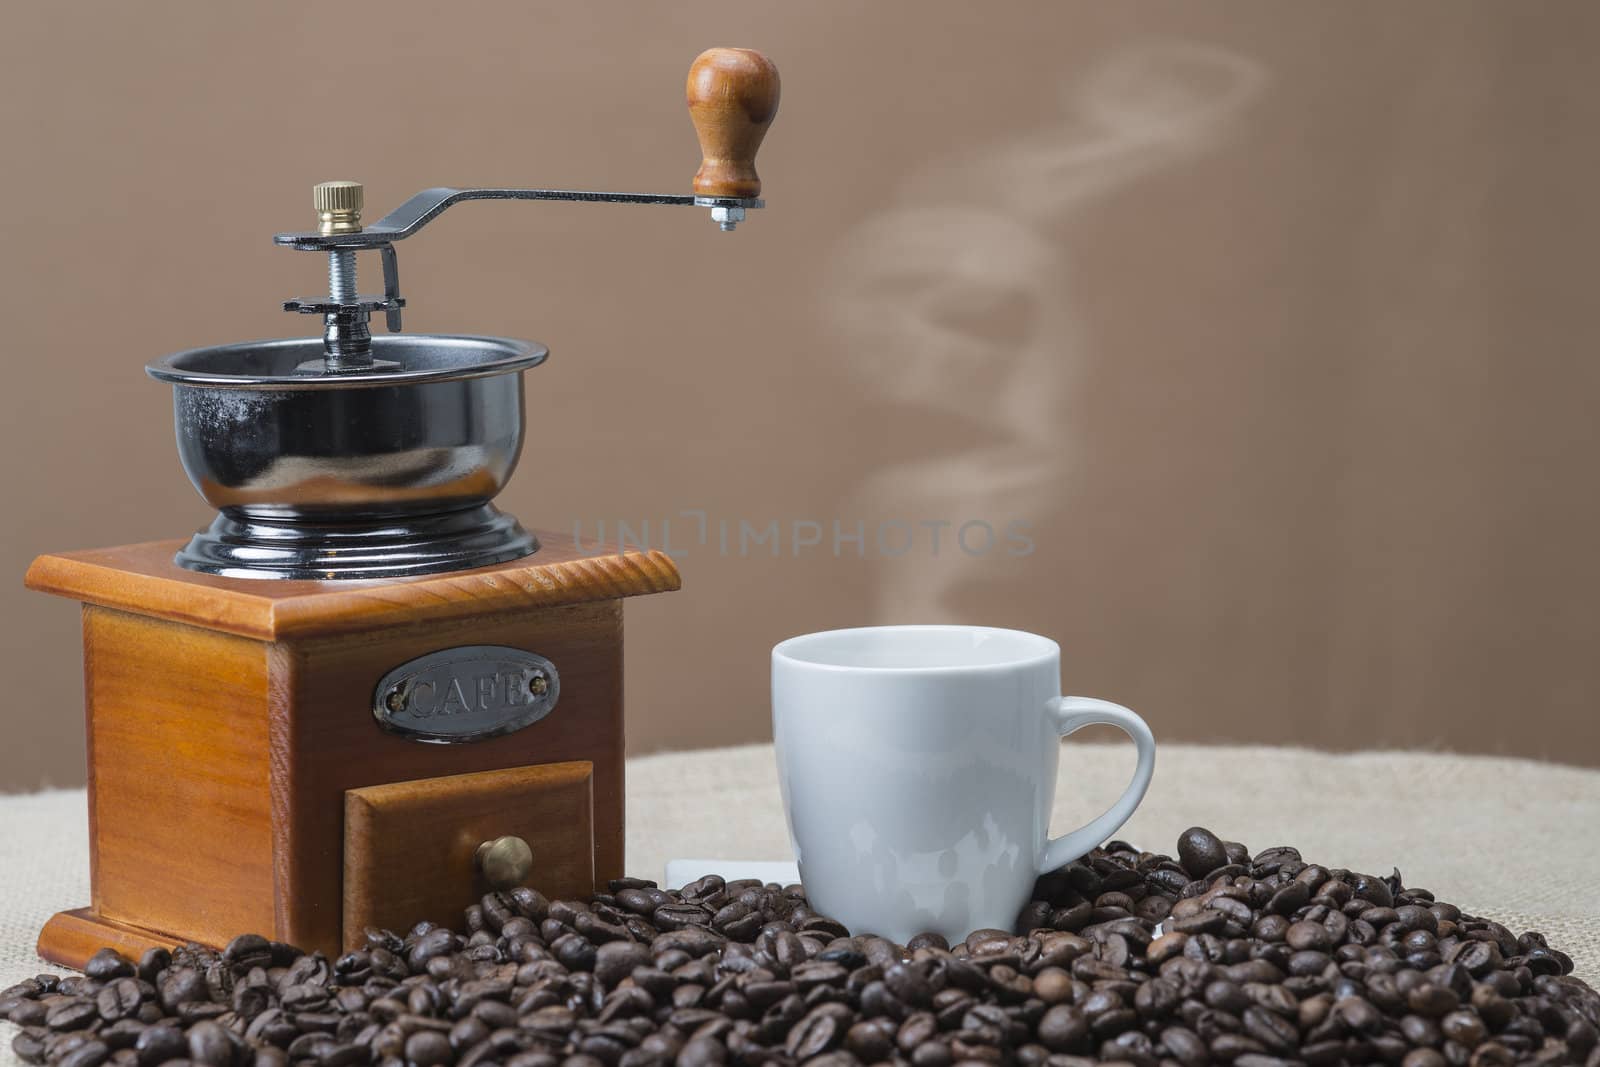 Steaming coffee beside the grinder by angelsimon